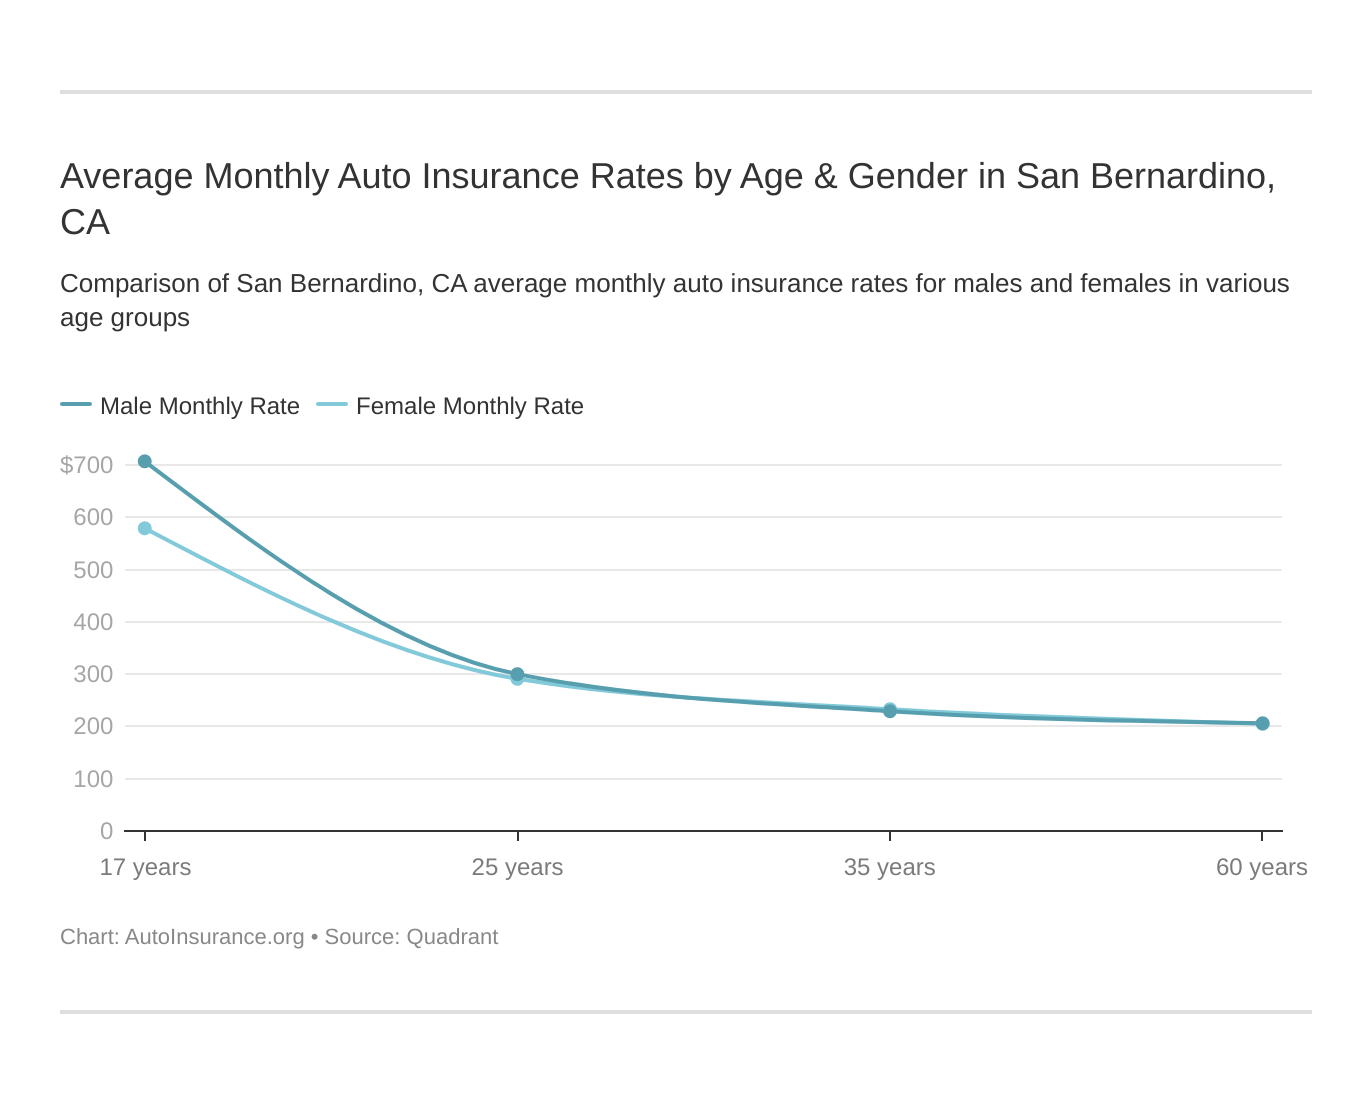 Average Monthly Auto Insurance Rates by Age & Gender in San Bernardino, CA